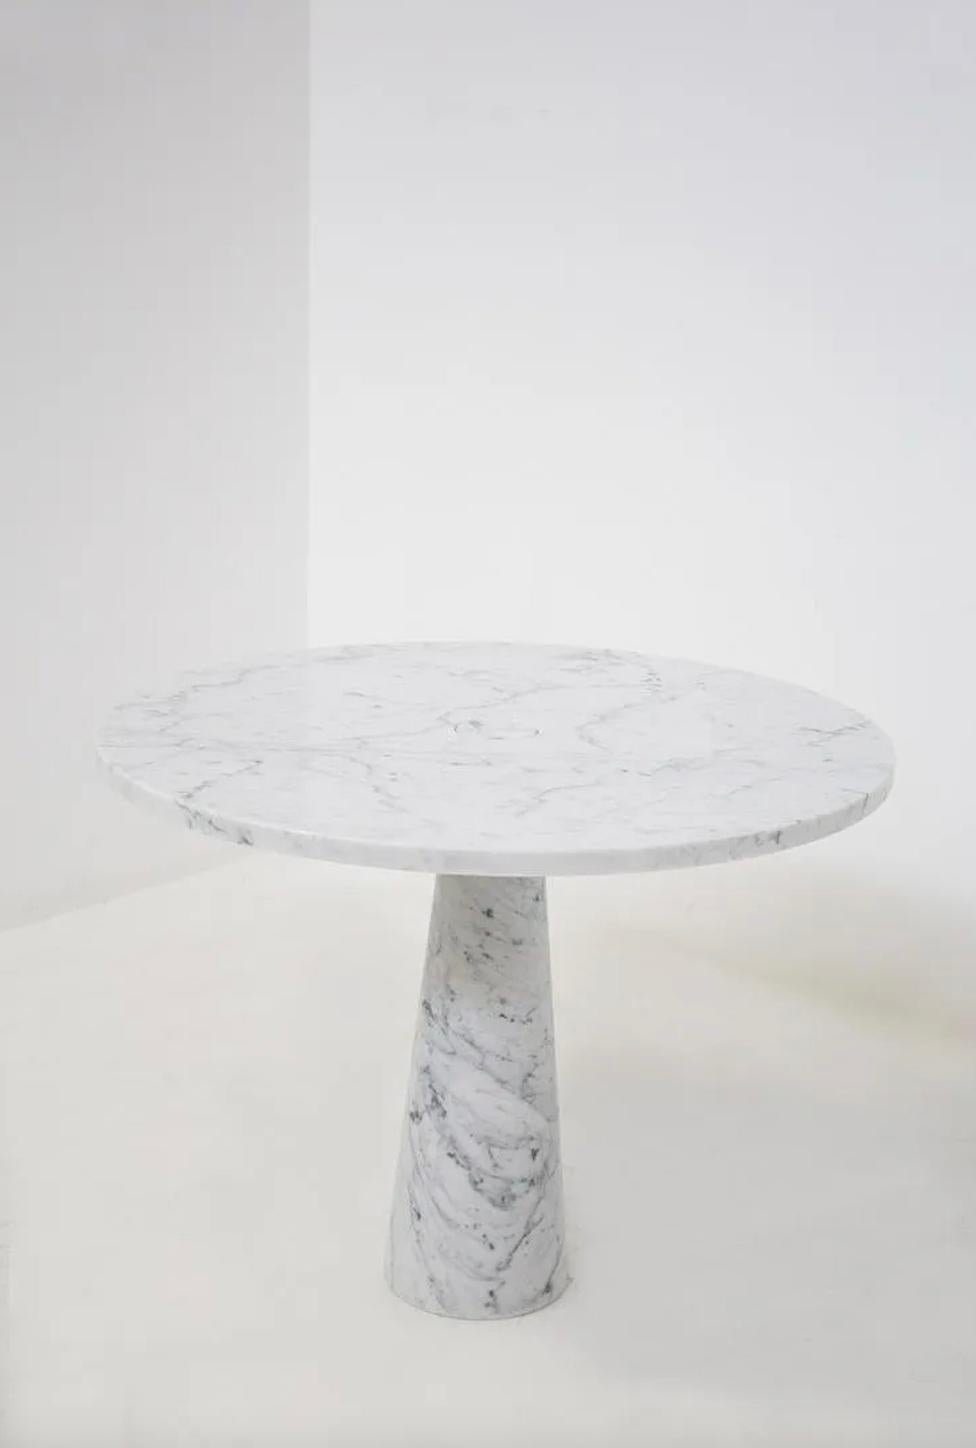 Elegant and refined design table designed by Angelo Mangiarotti for Skipper in the 1970s. The table is entirely made of white marble. The table is a small centre table and is ideal as a grand foyer table or as a lounge table. The table consists of a